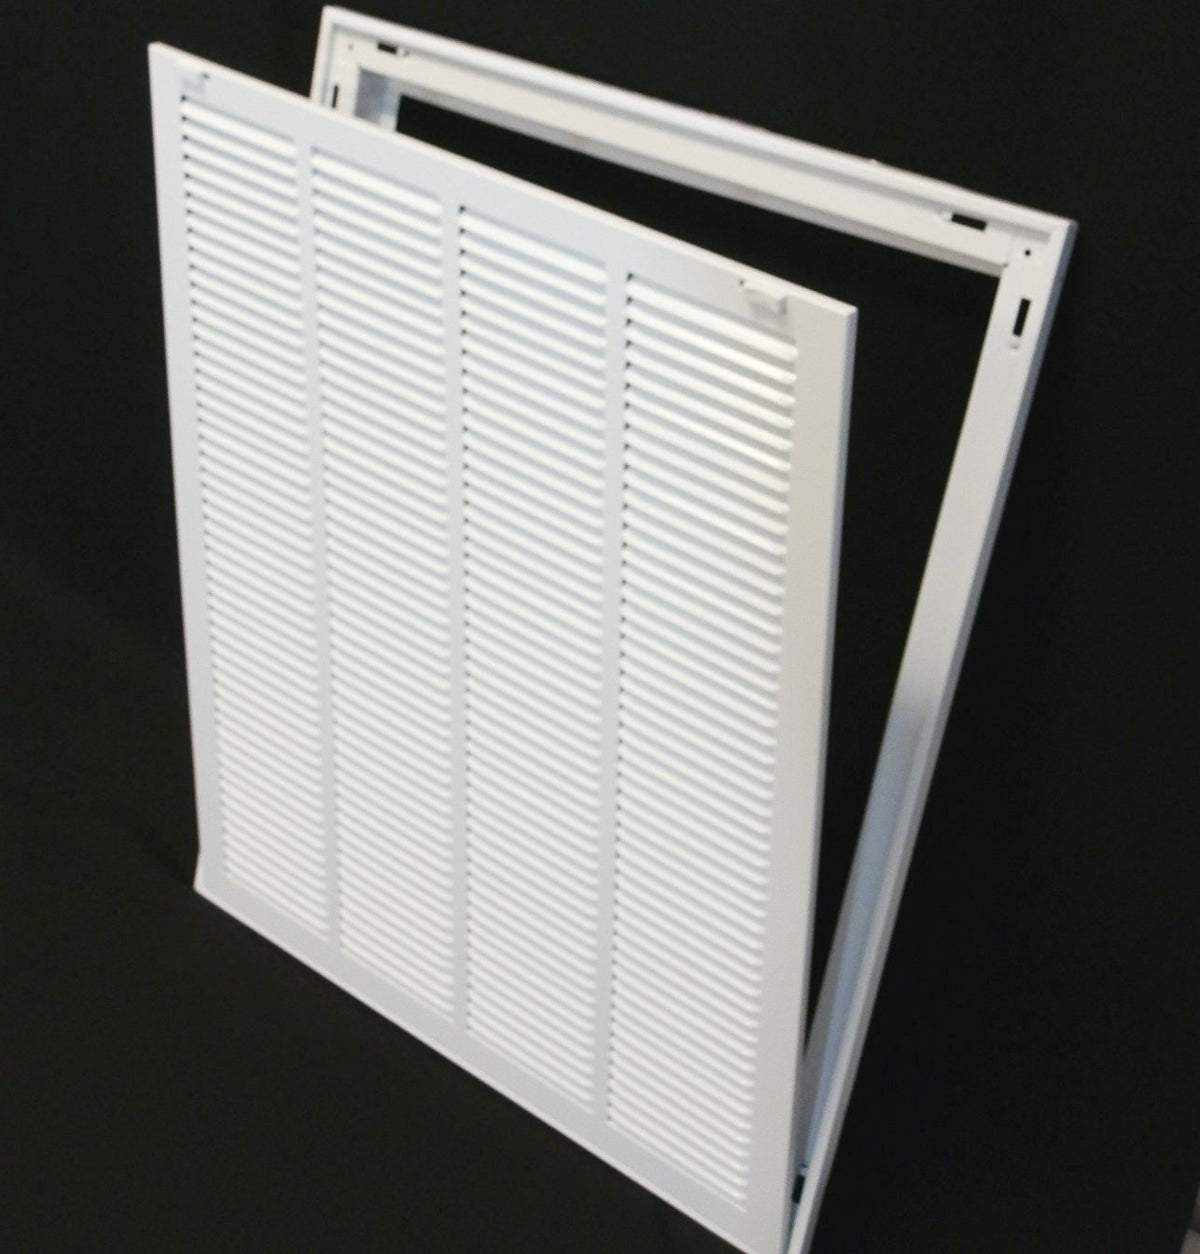 20&quot; X 24&quot; Steel Return Air Filter Grille for 1&quot; Filter - Removable Frame - [Outer Dimensions: 22 5/8&quot; X 26 5/8&quot;]